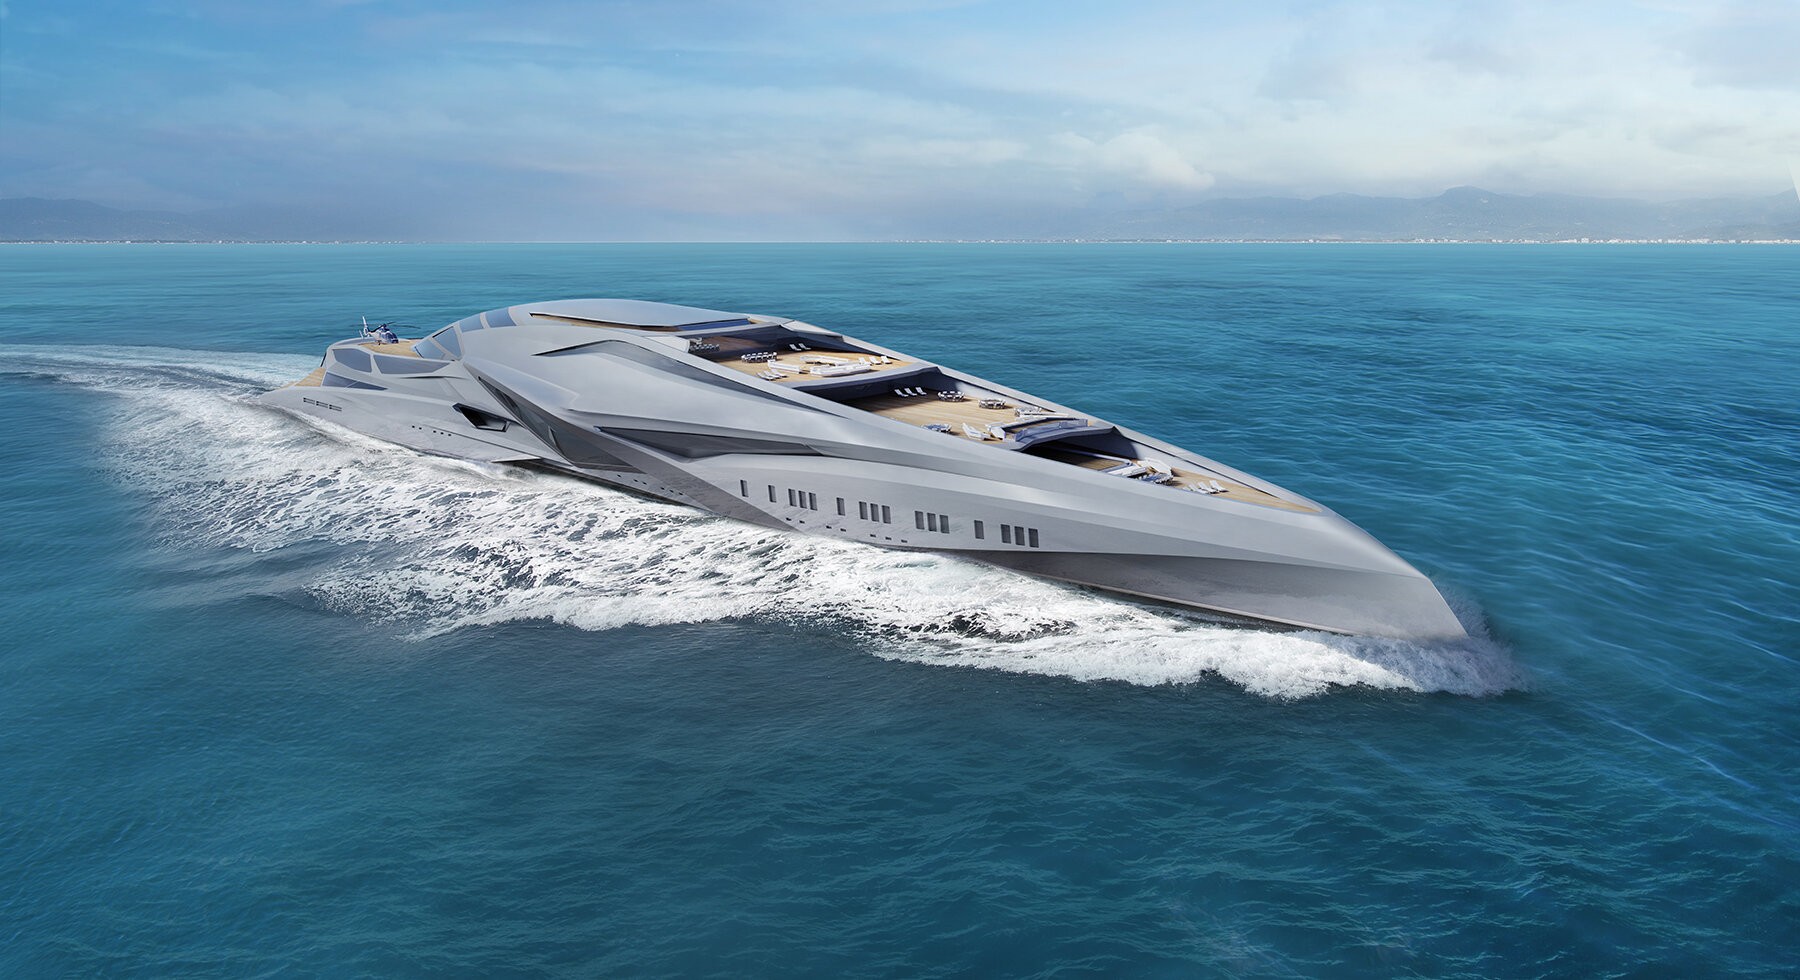 Project Valkyrie Is Considered World’s Biggest Super-Yacht - autoevolution